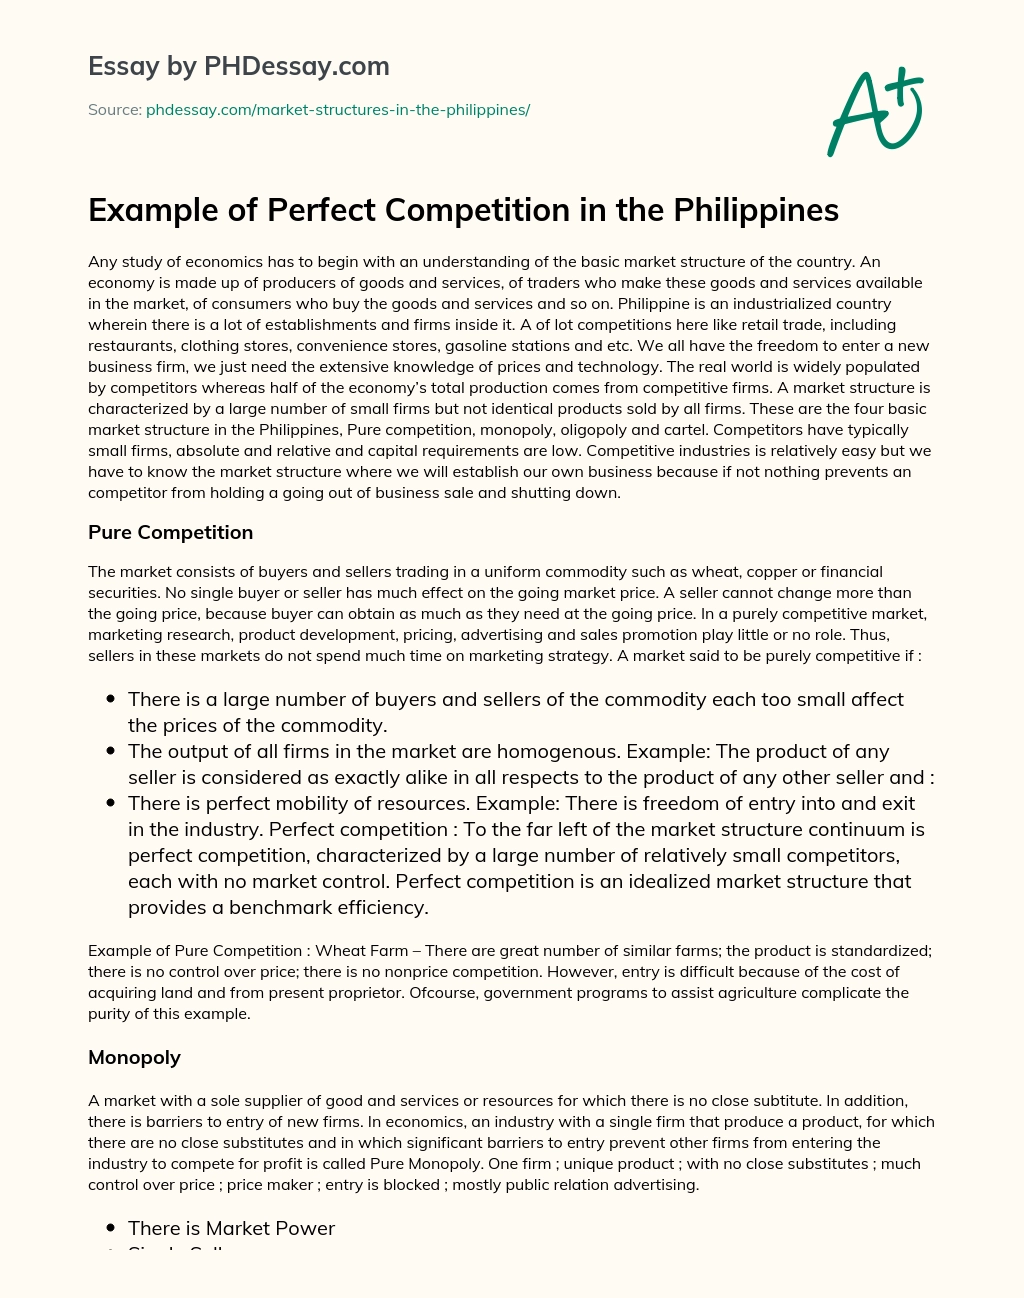 Example of Perfect Competition in the Philippines essay